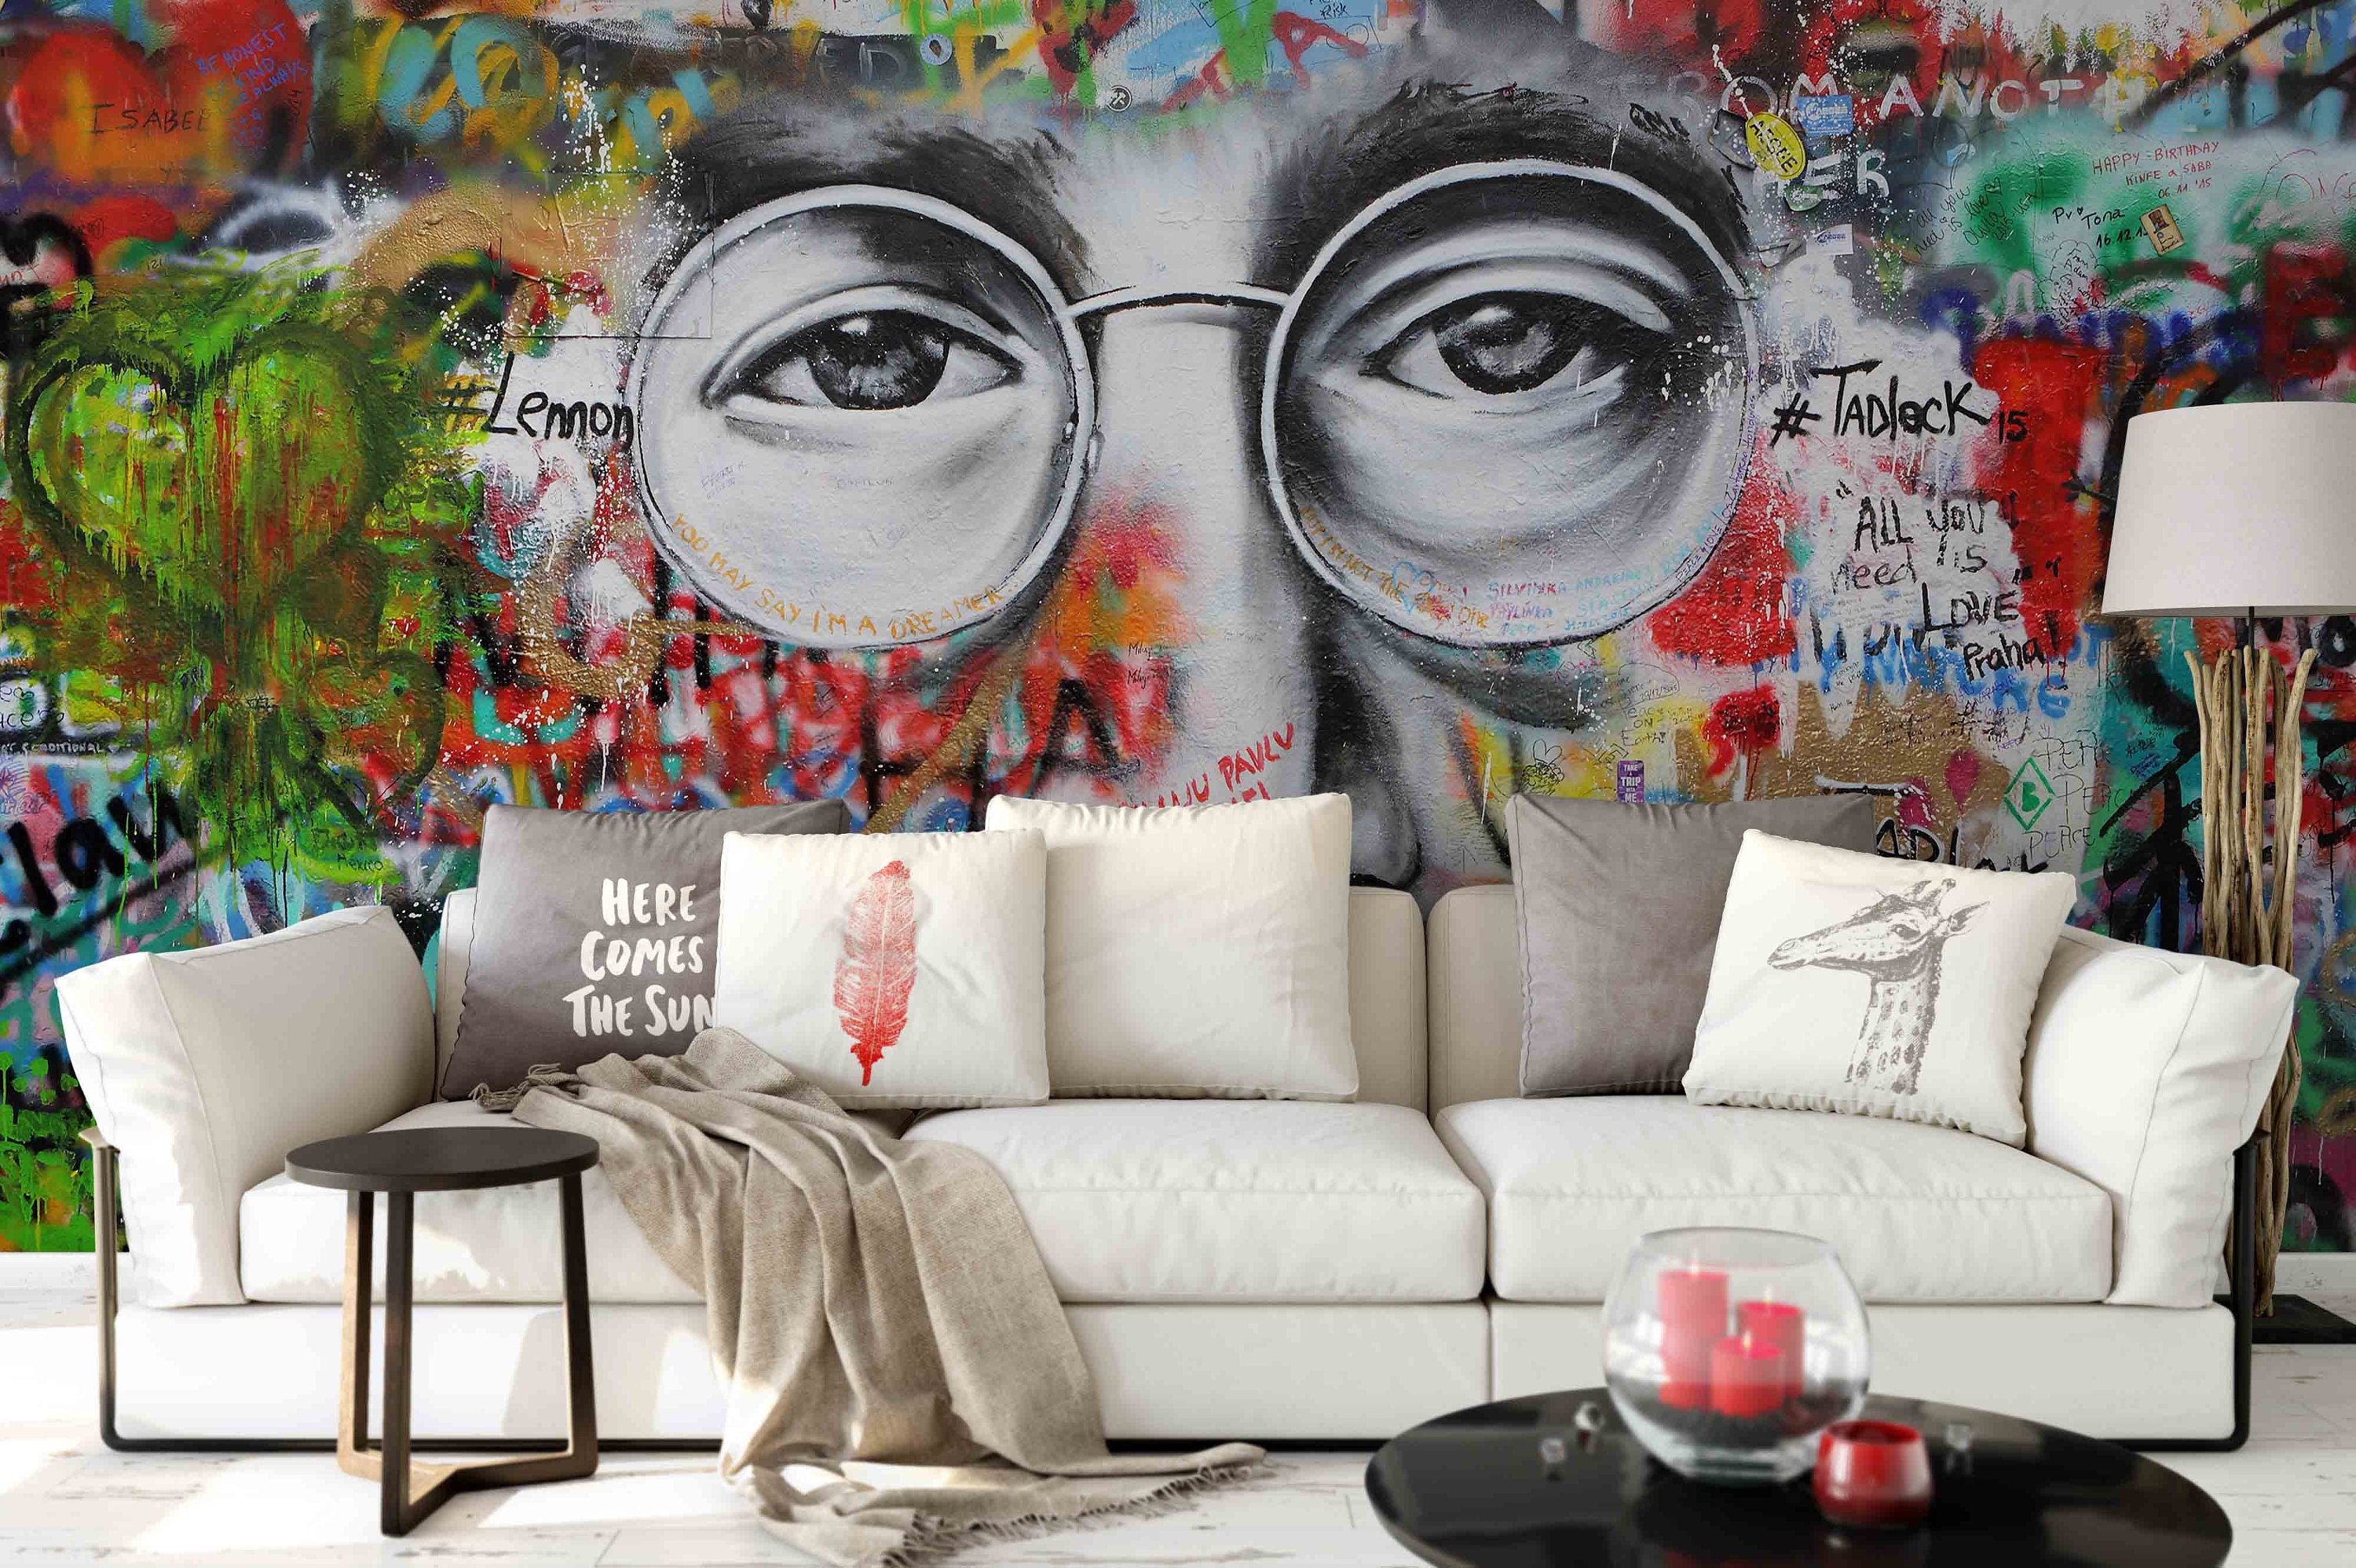 Buy Generic John Lennon Vinyl Wall Art Sticker Decal Customize Colors  Available Black White Green Wallpaper Mural Adesivo De Parede D567 Black  79Cmx57Cm Online at Low Prices in India  Amazonin